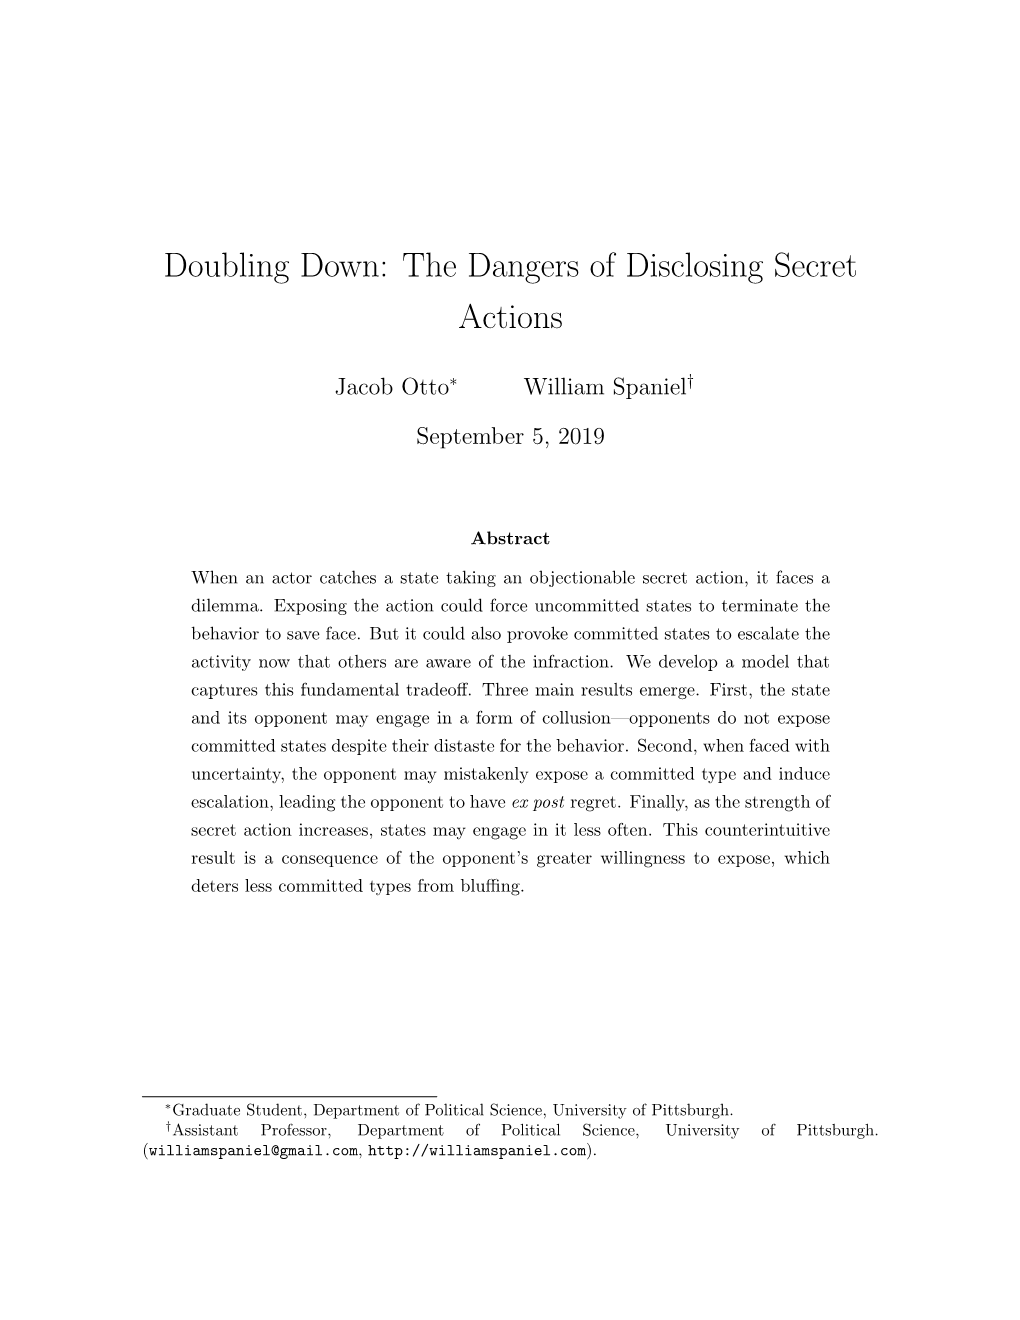 Doubling Down: the Dangers of Disclosing Secret Actions